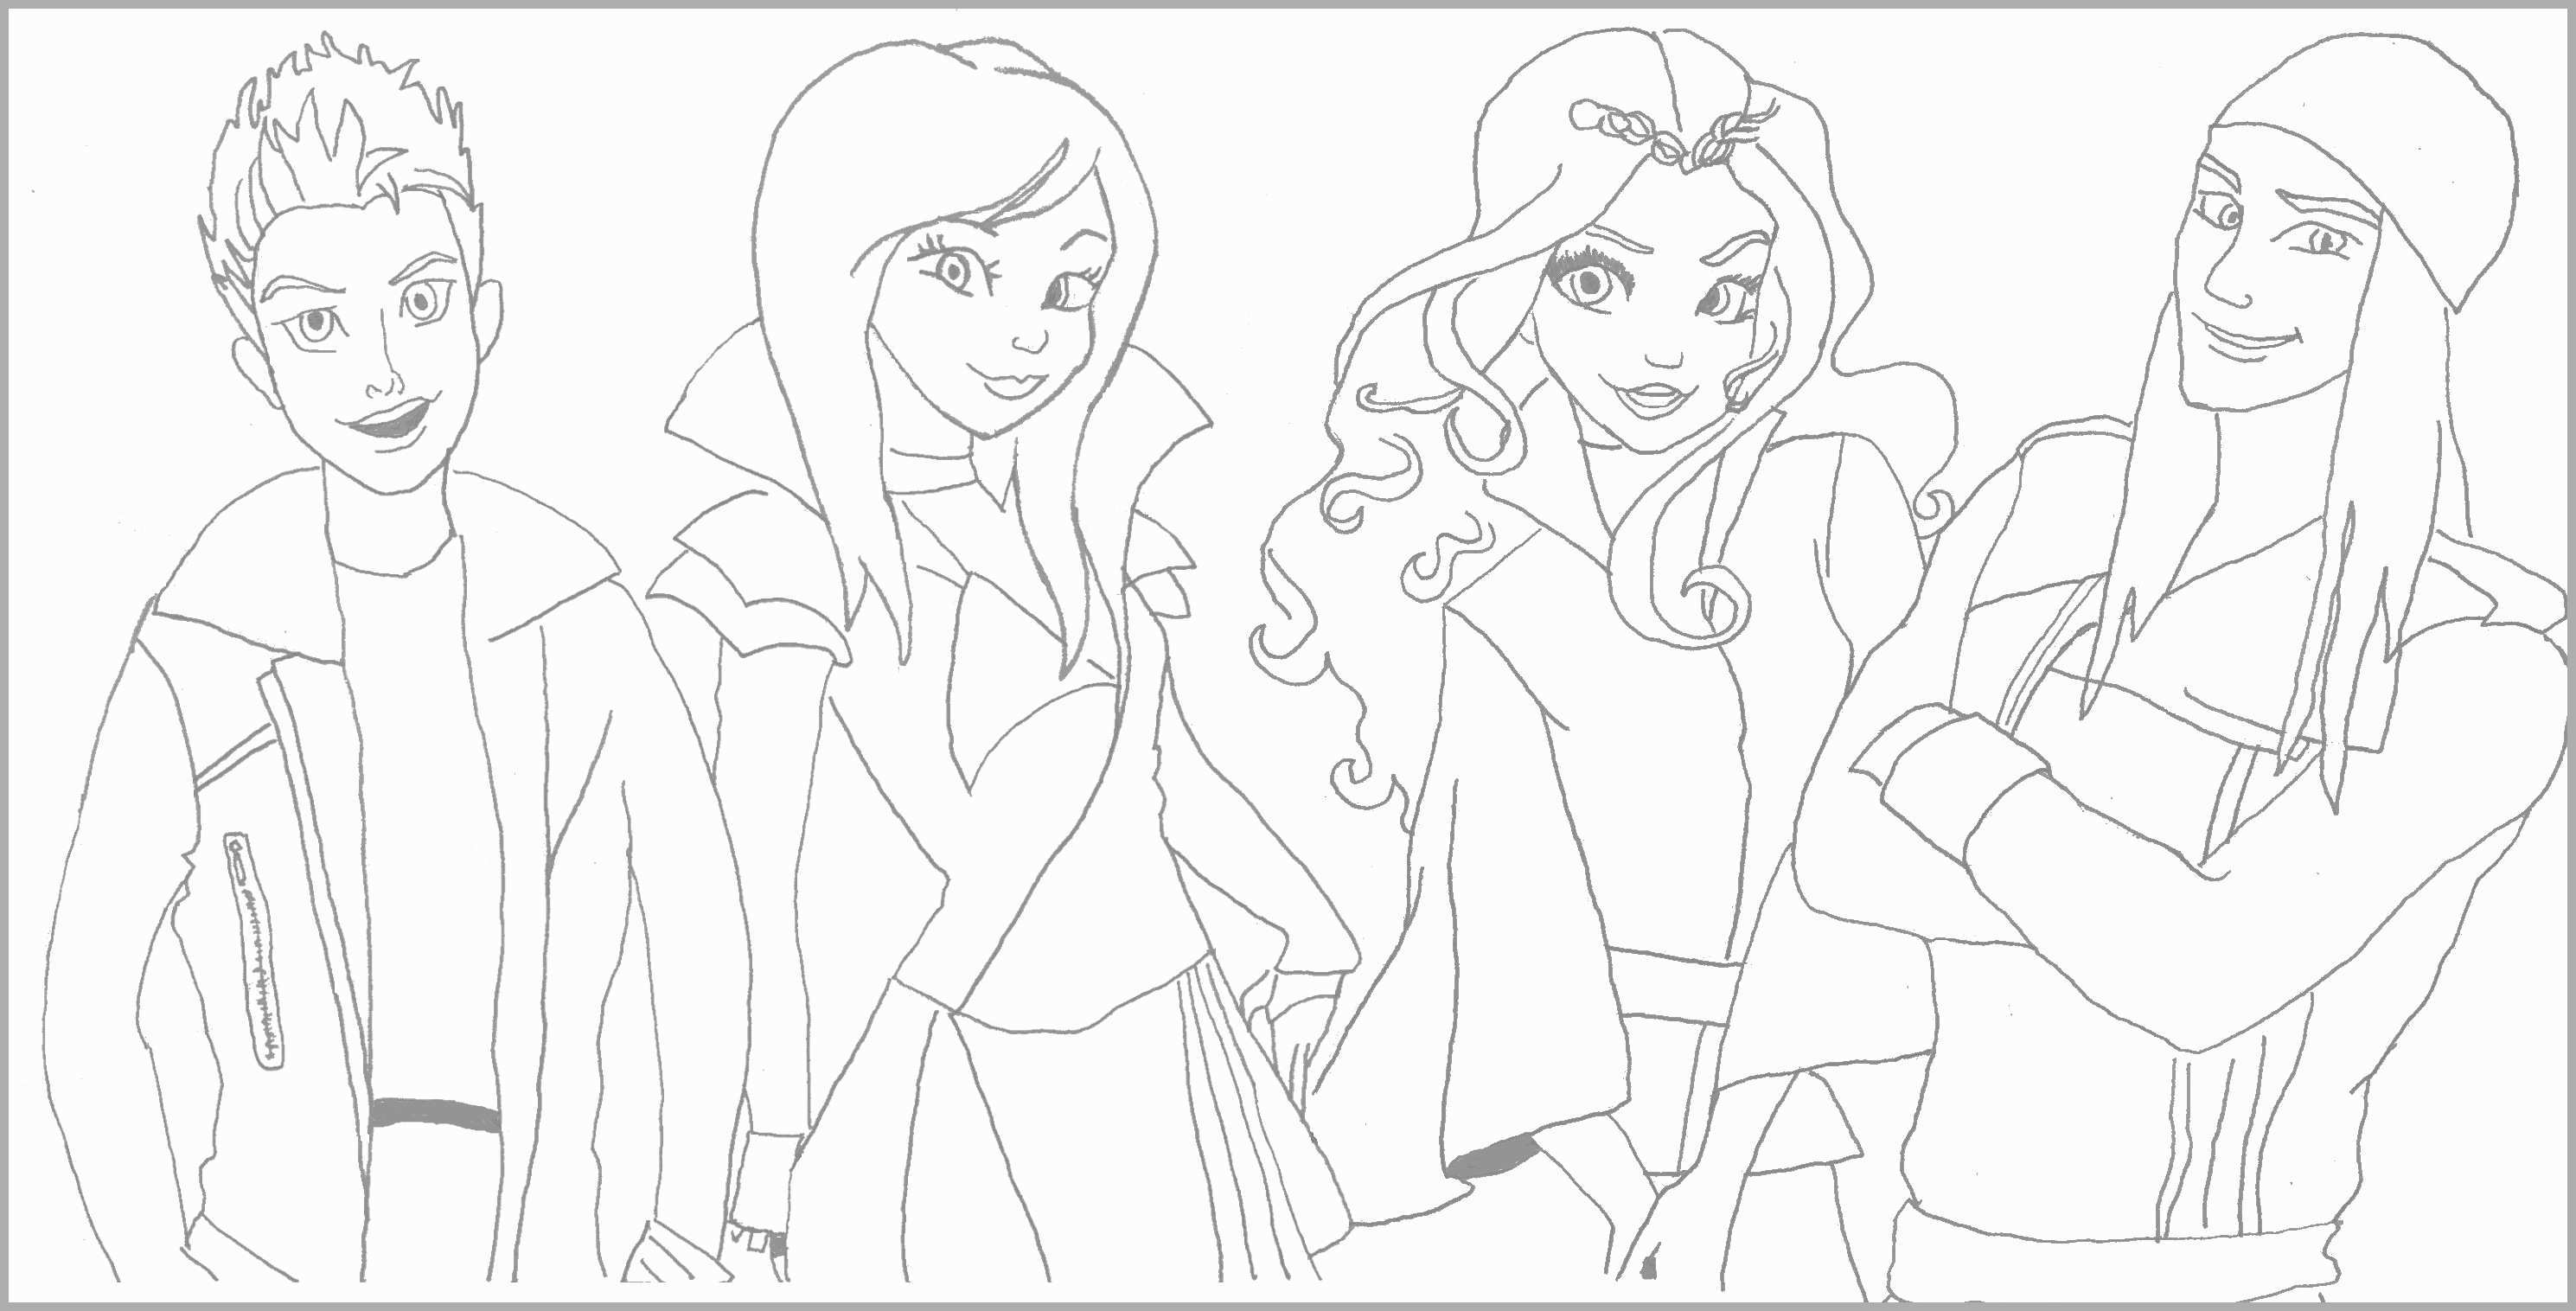 Descendants Coloring Pages Mal 2 And Printable Des Evie. Disney with regard to Free Printables Of Descesdants 2